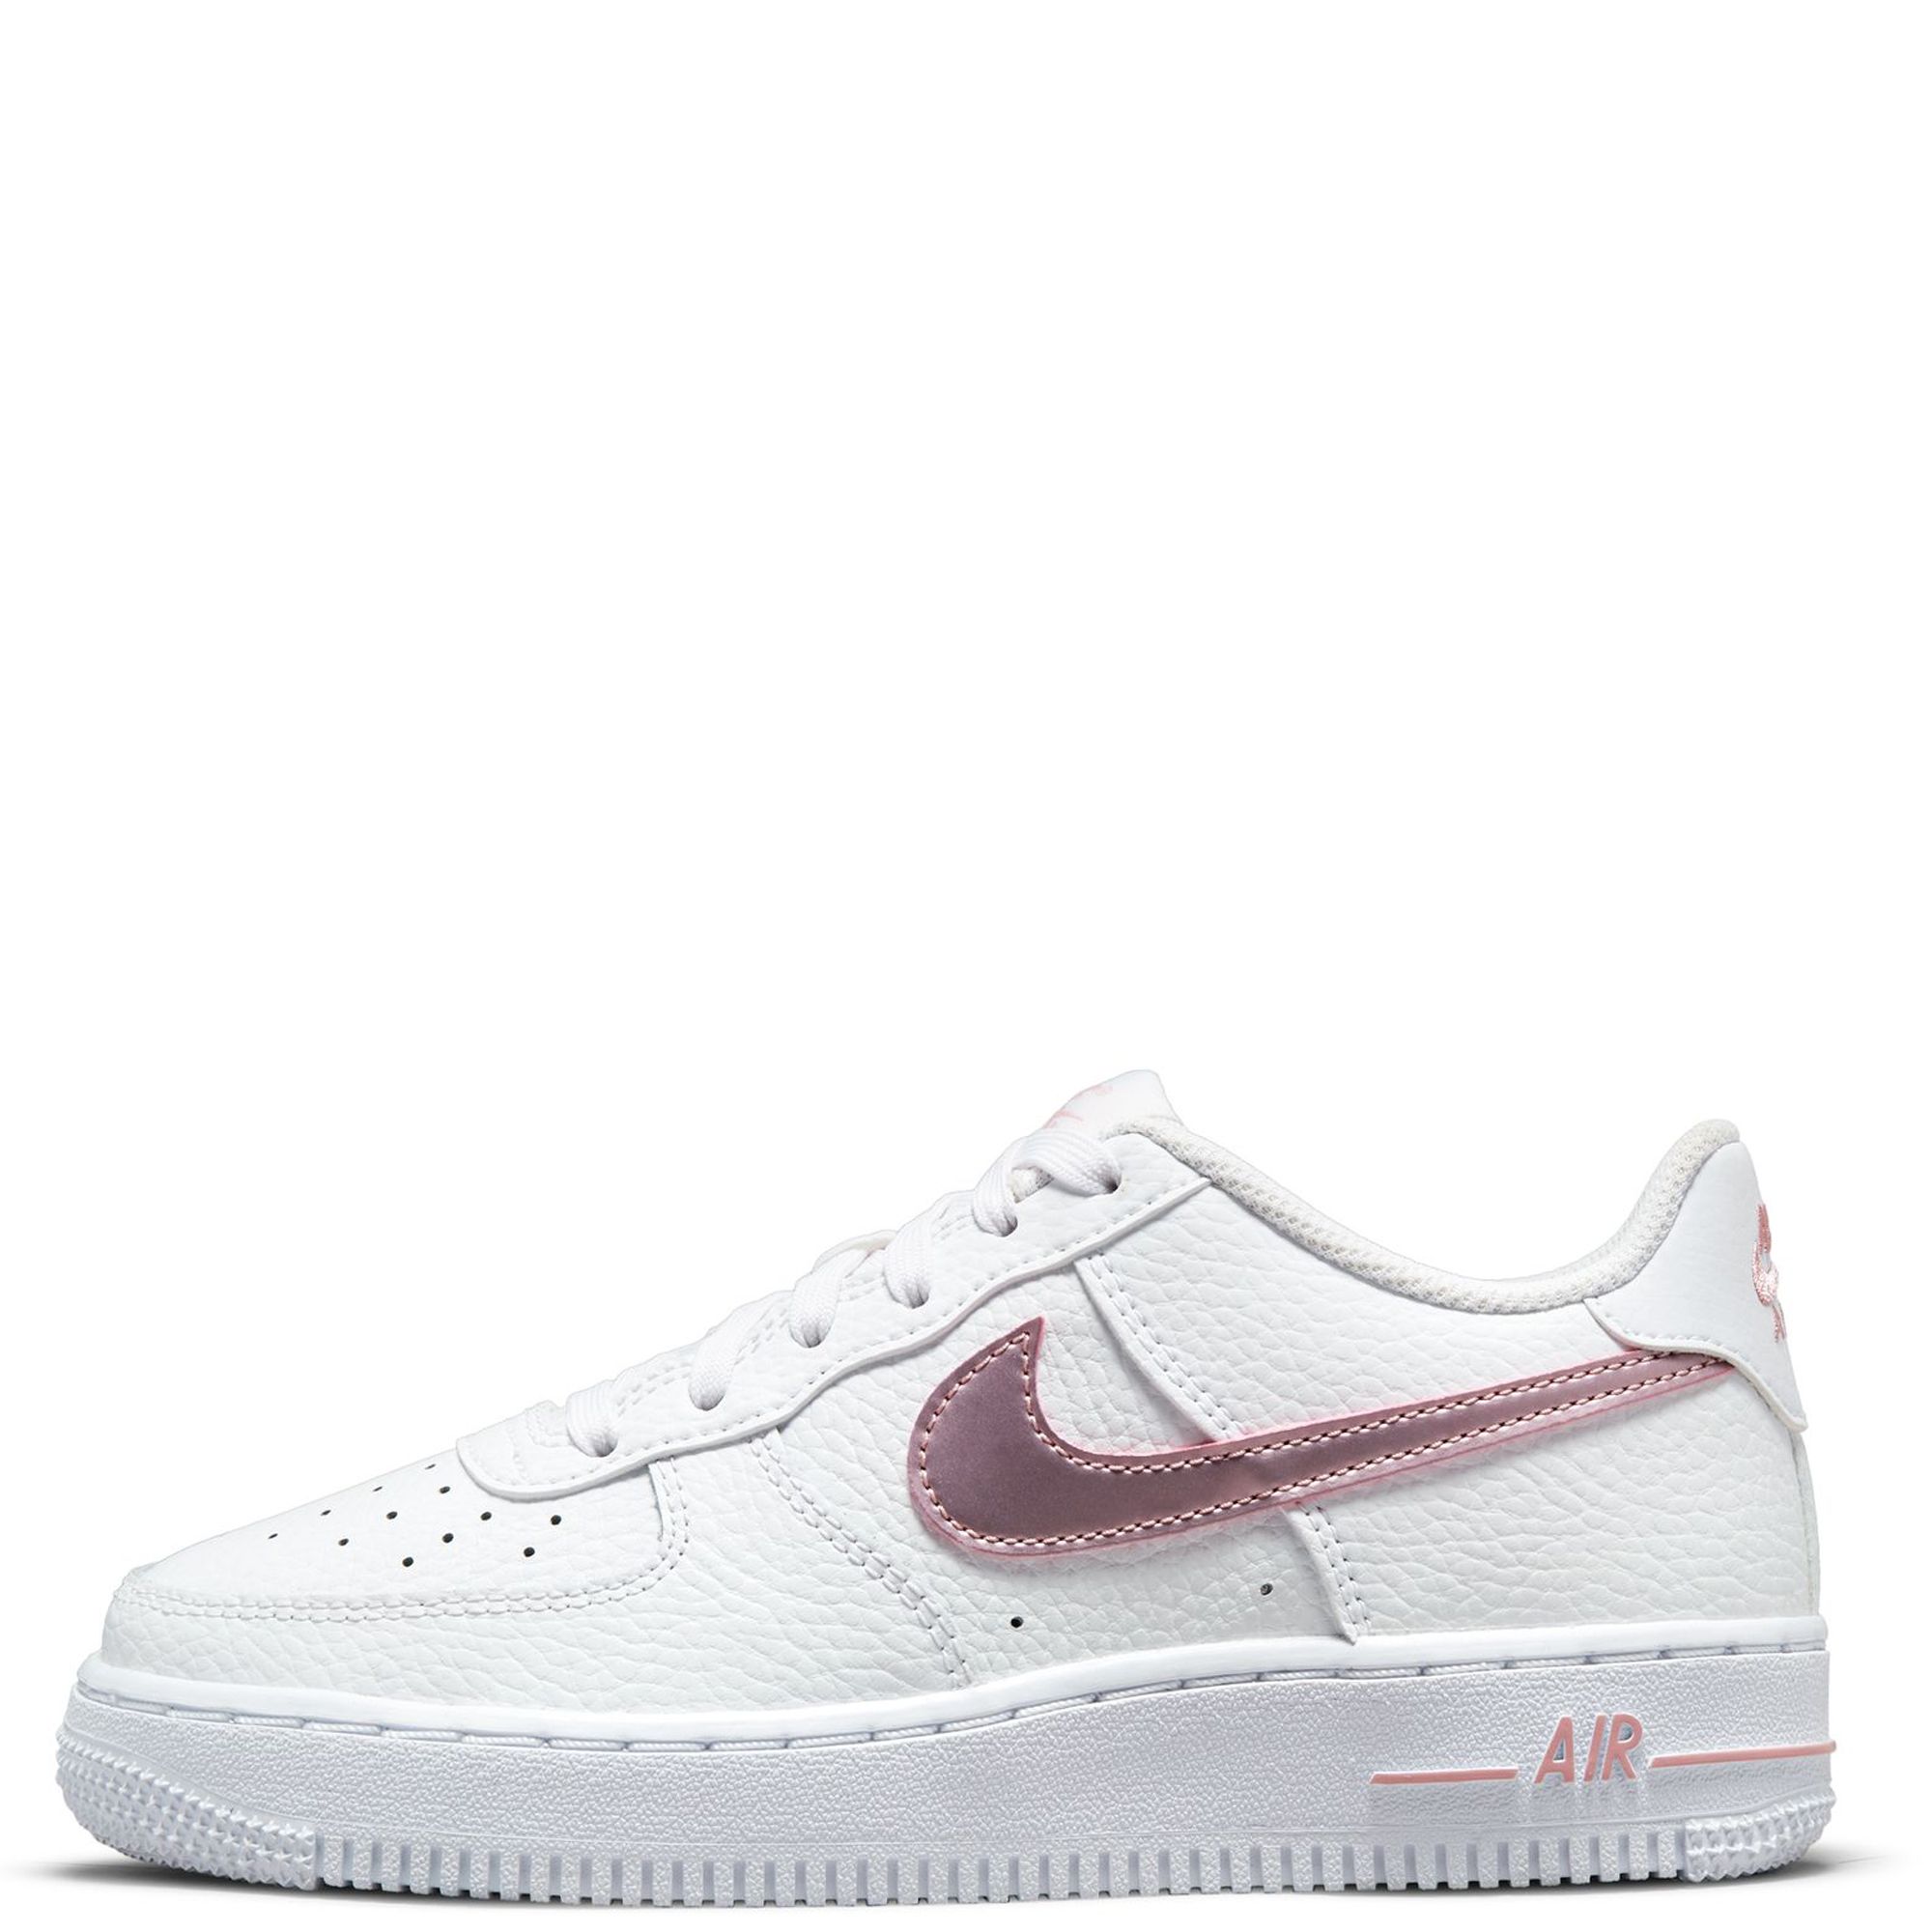 pink air forces